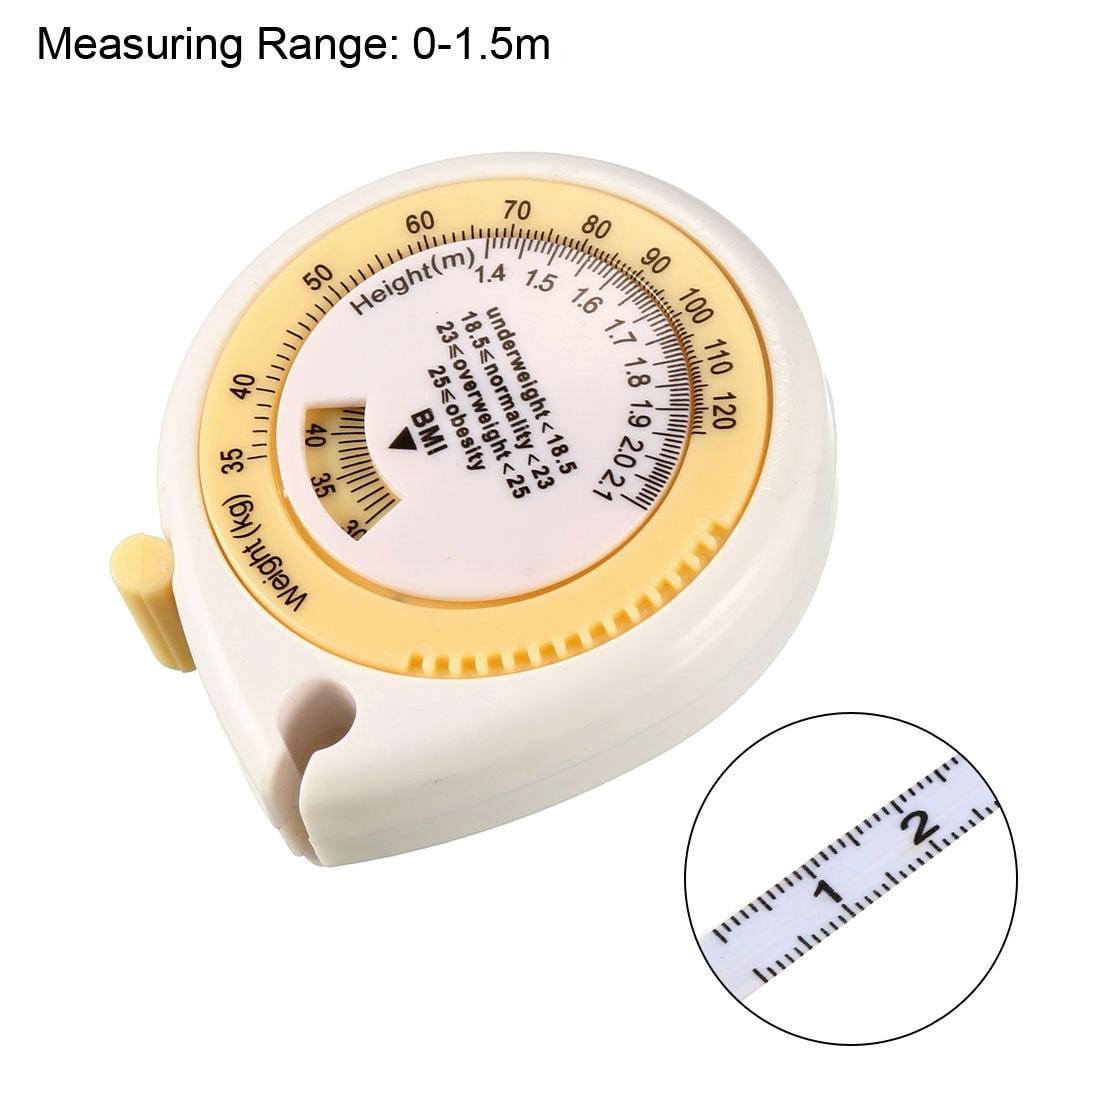 https://ak1.ostkcdn.com/images/products/is/images/direct/b4883974e04cba3ff0df64ce916b3d7144826e31/BMI-Calculator-1.5m-Body-Tape-Measure-White-and-Yellow.jpg